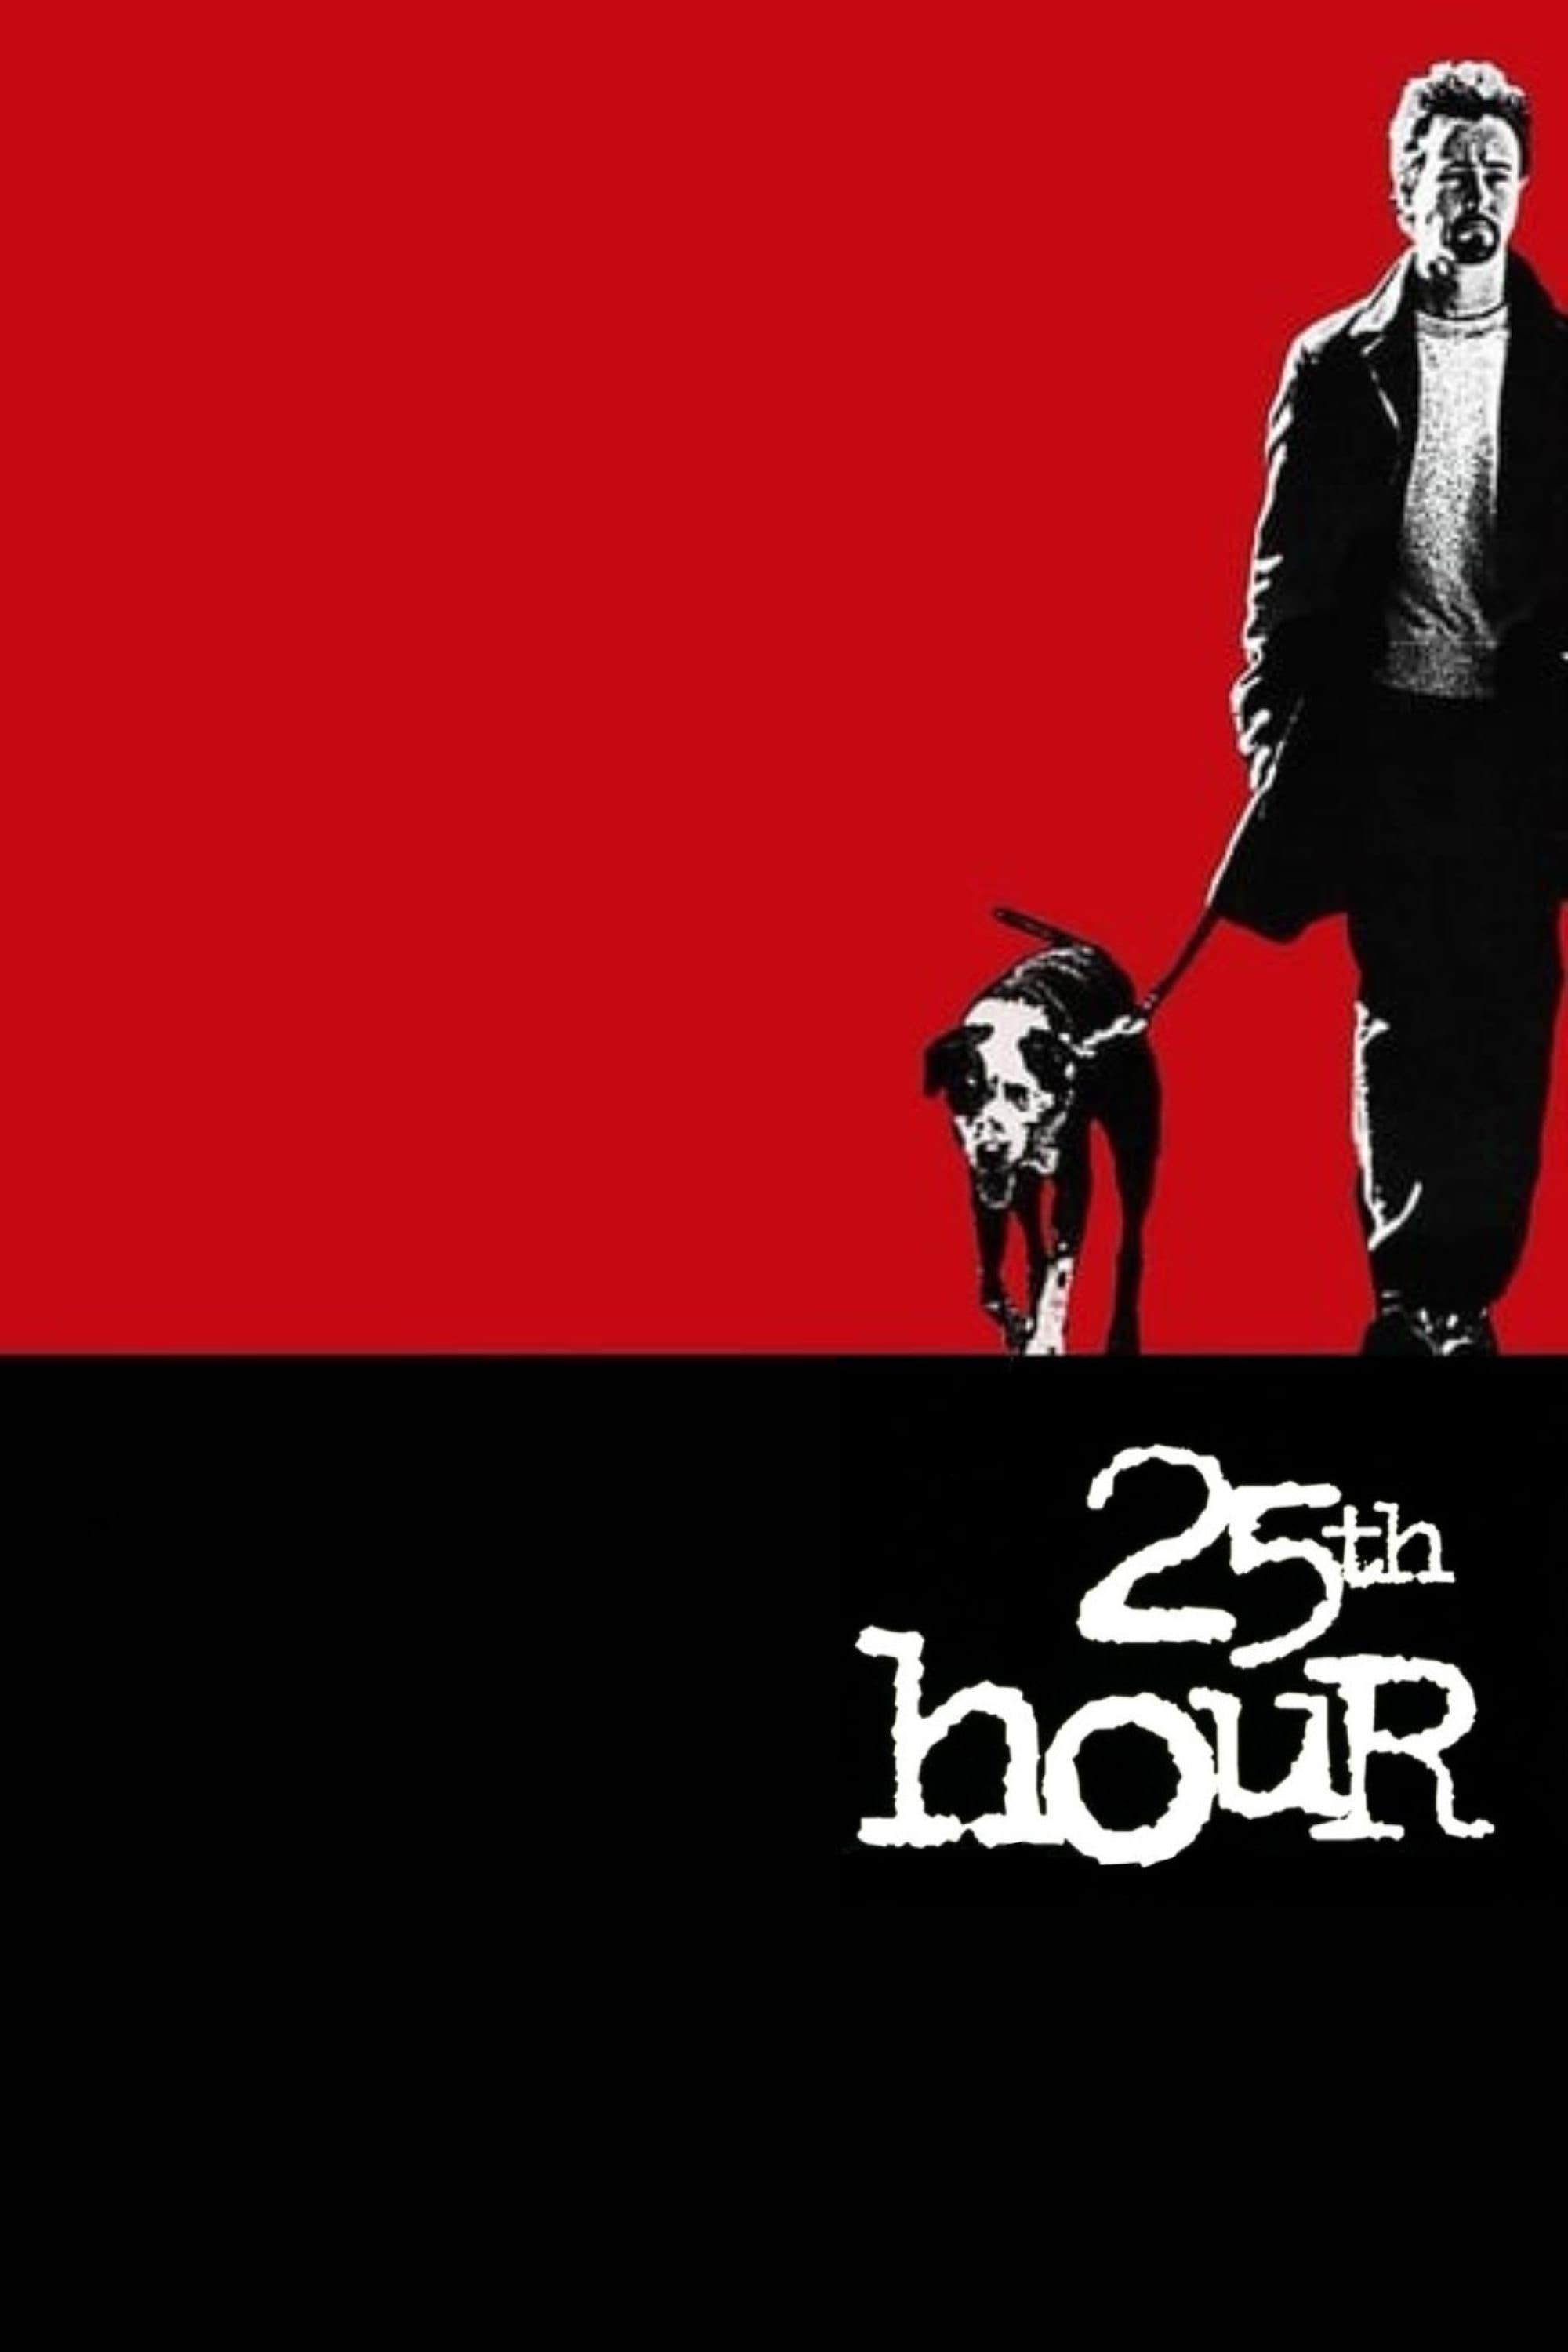 25th Hour poster